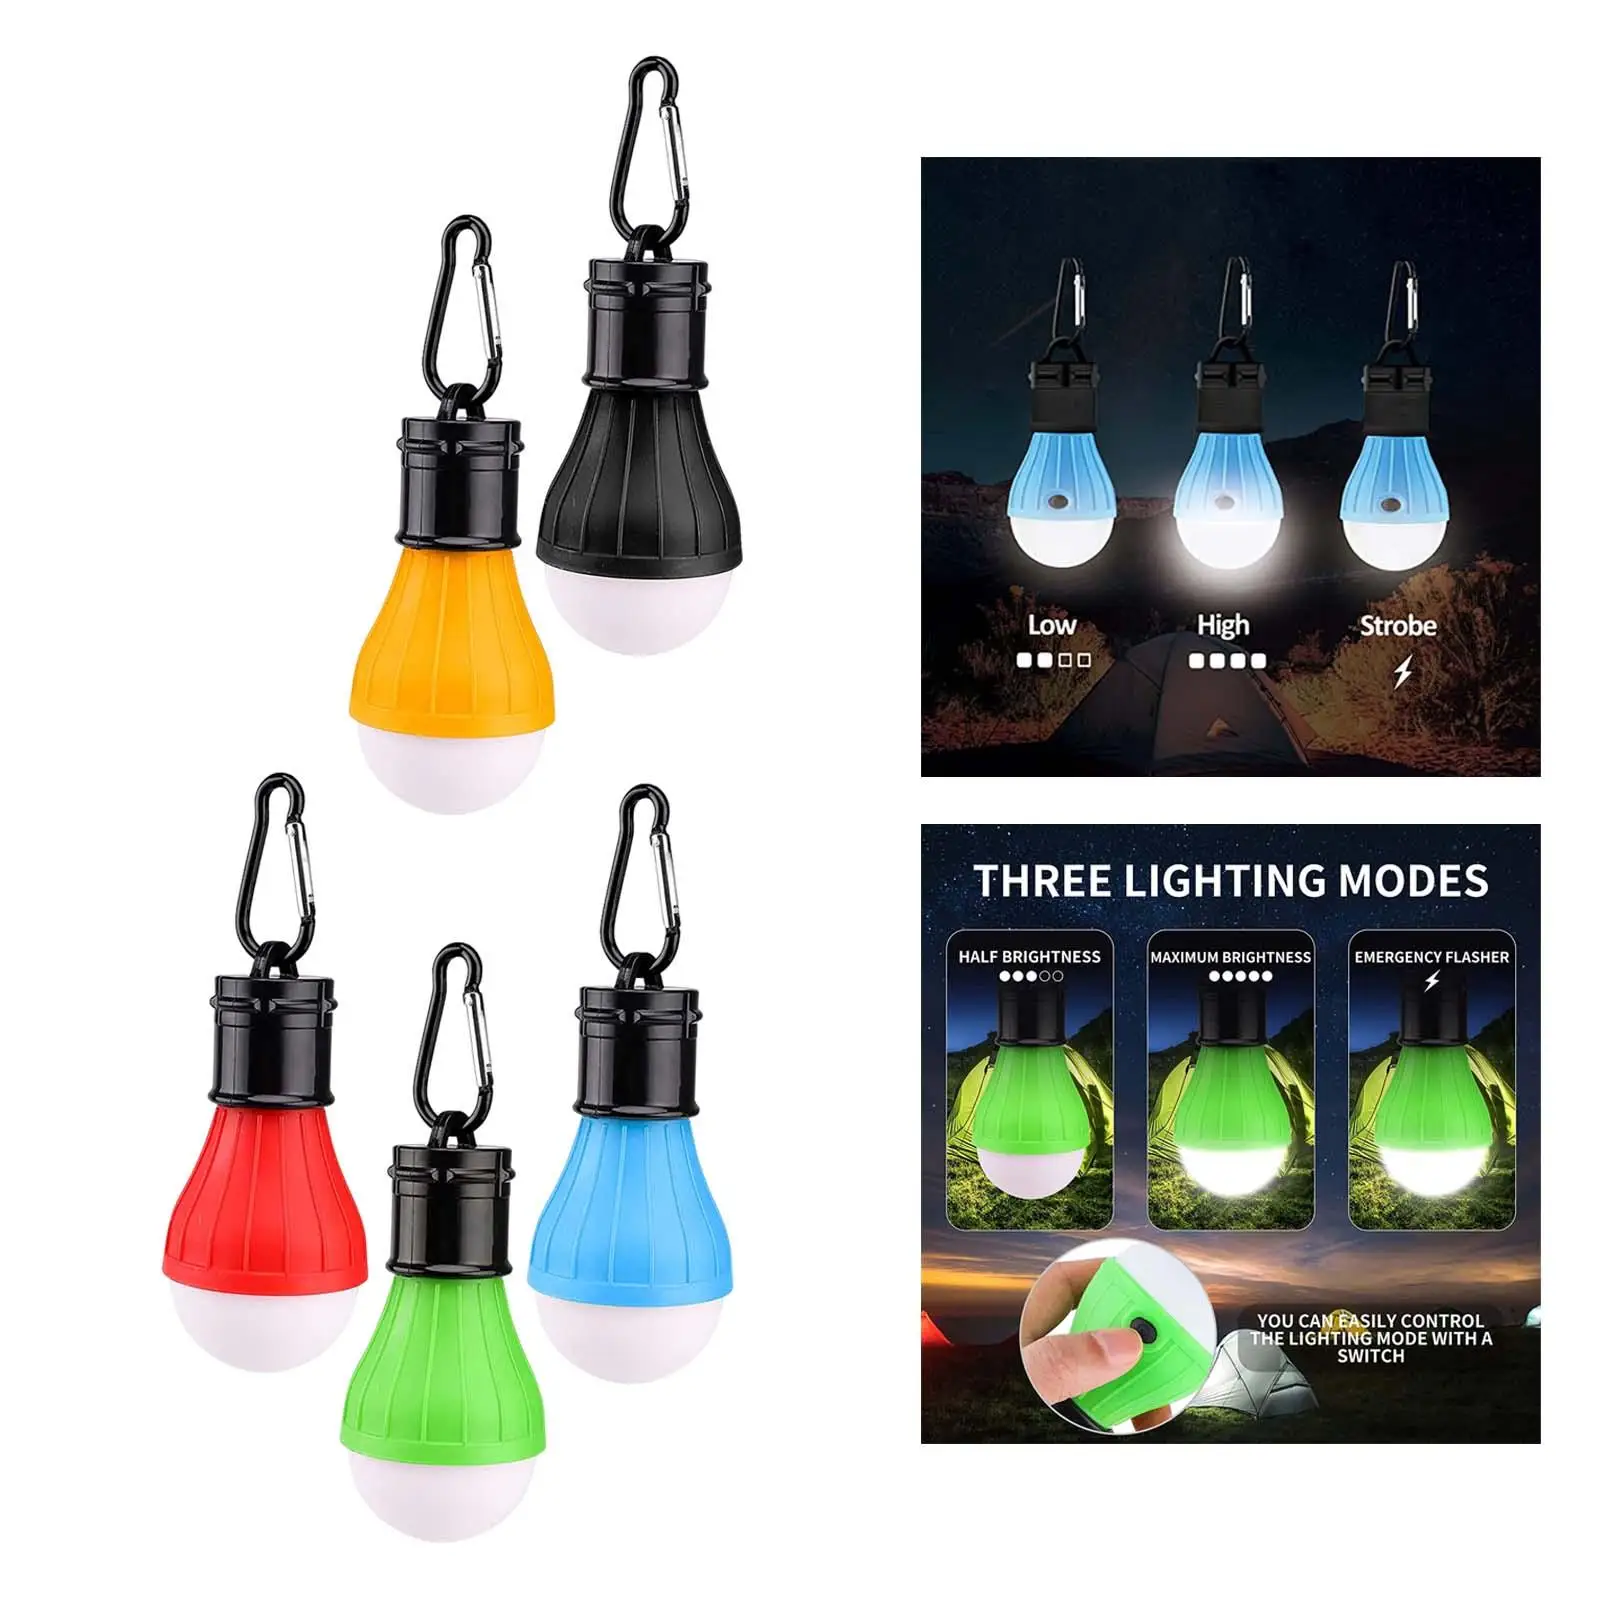 5Pcs LED Camping Lantern Light Tent Lamp with Carabiner Clips Battery Powered Bulb Dimmable for Camping Mountaineering Household